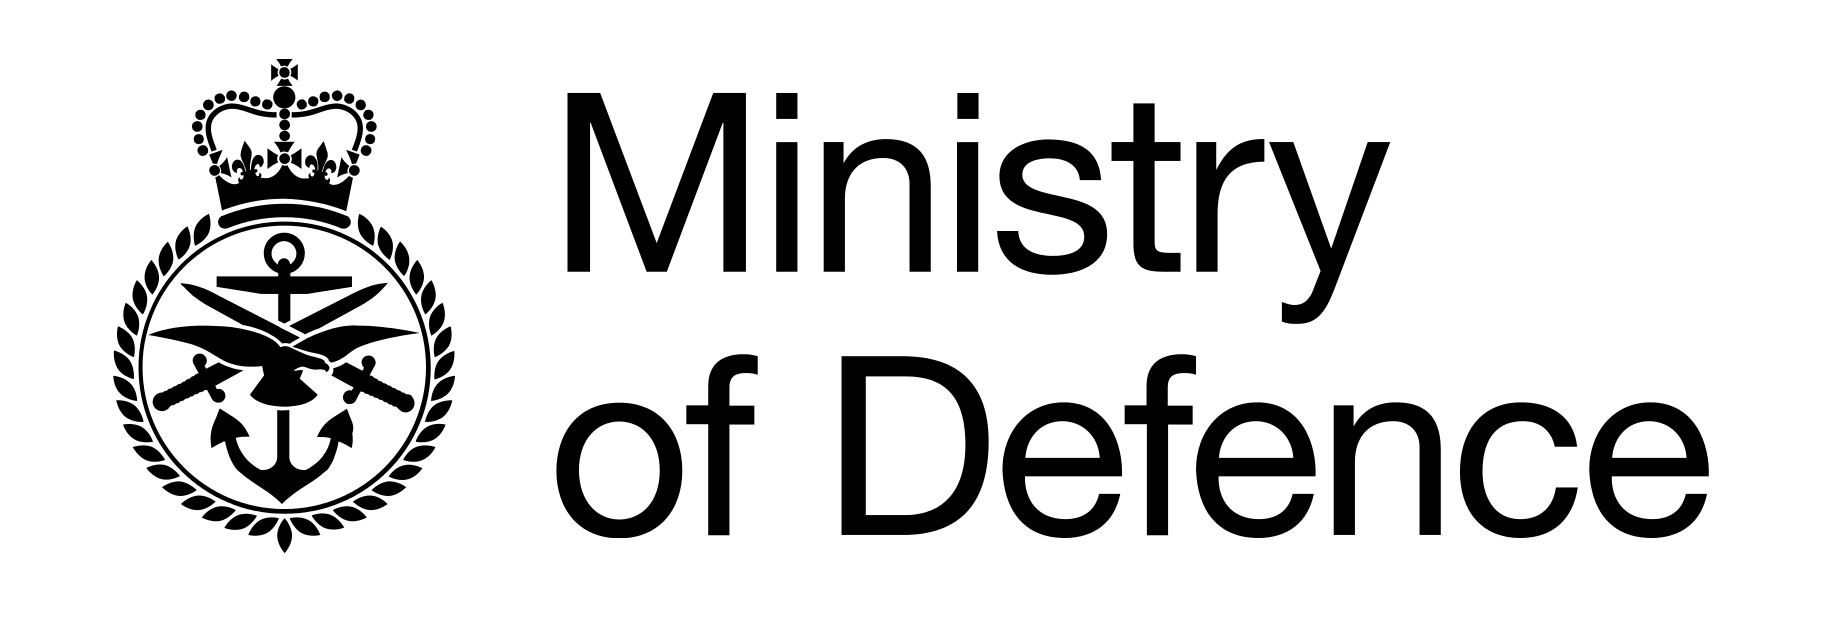 Ministry of defence logo